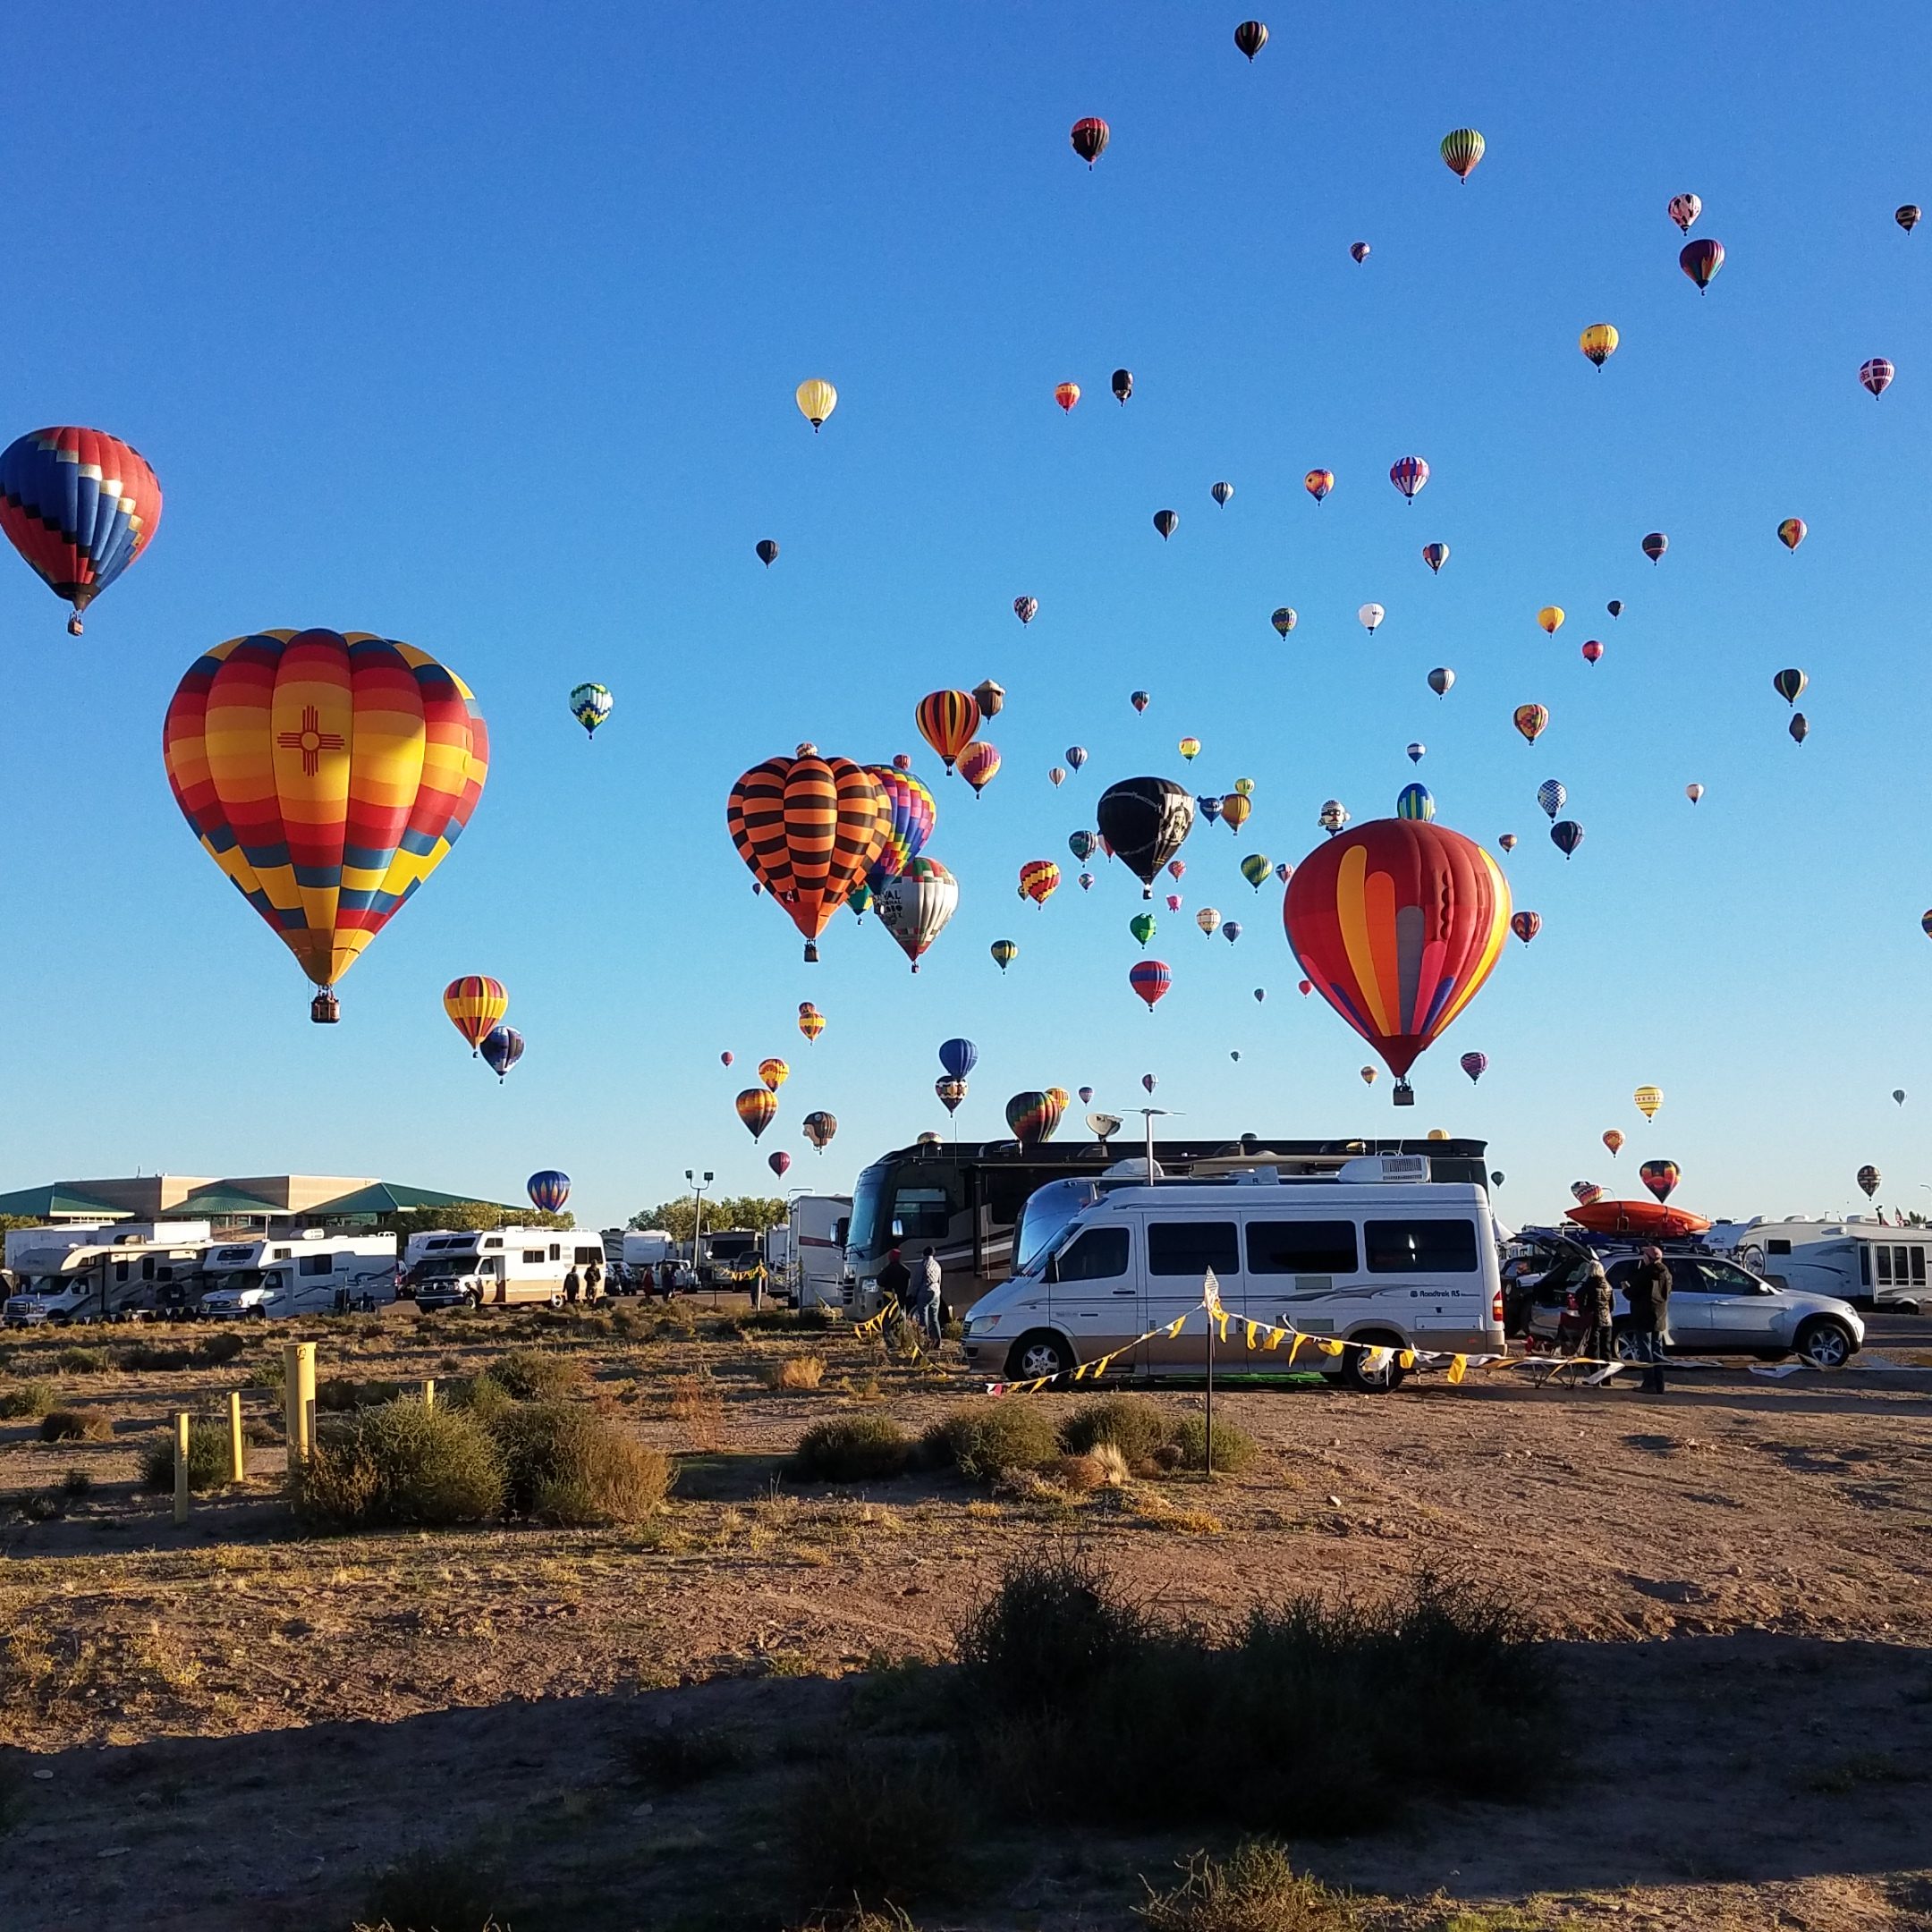 23 RV Parks within 25 miles of the Albuquerque International Hot Air